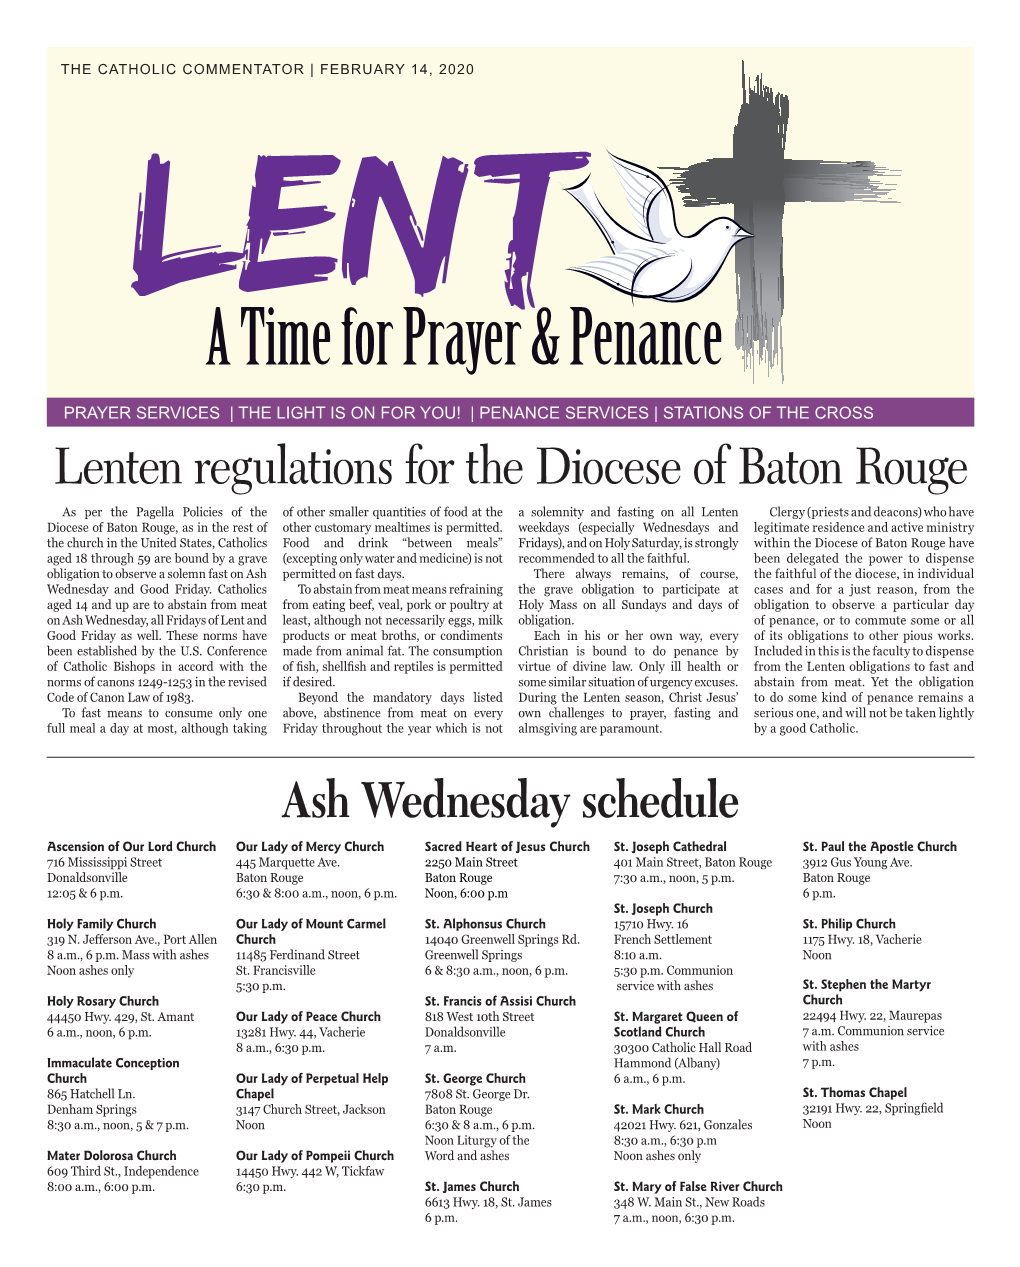 Lenten Regulations for the Diocese of Baton Rouge